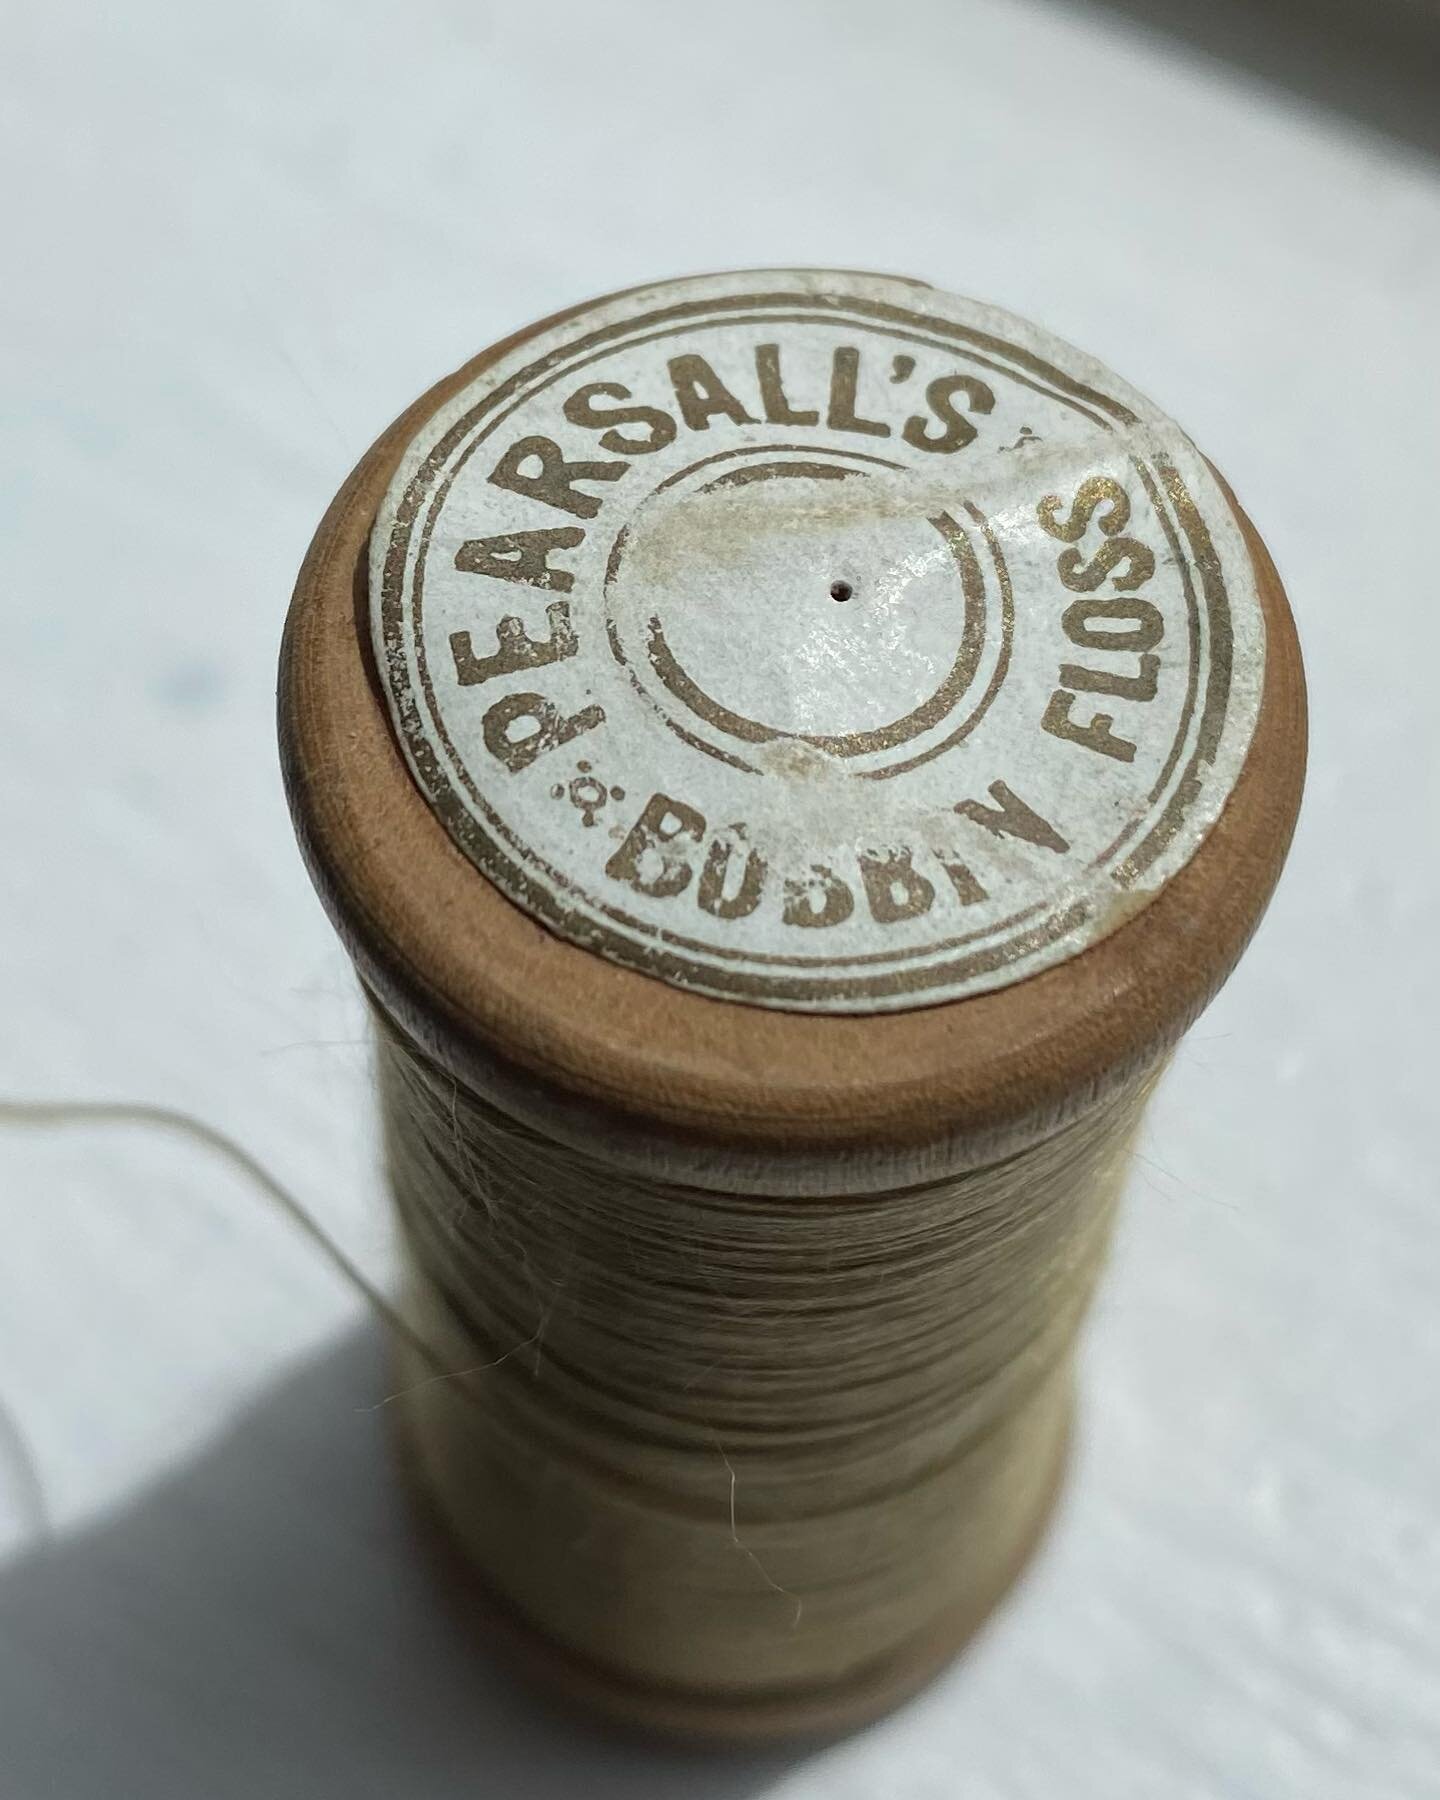 Pearsall&rsquo;s Bobbin Floss - can anyone tell me if this is real silk or artificial silk?  Looks and feels like silk but I&rsquo;m not sure.  Wooden reel approx 2&rdquo; or 5 cm tall